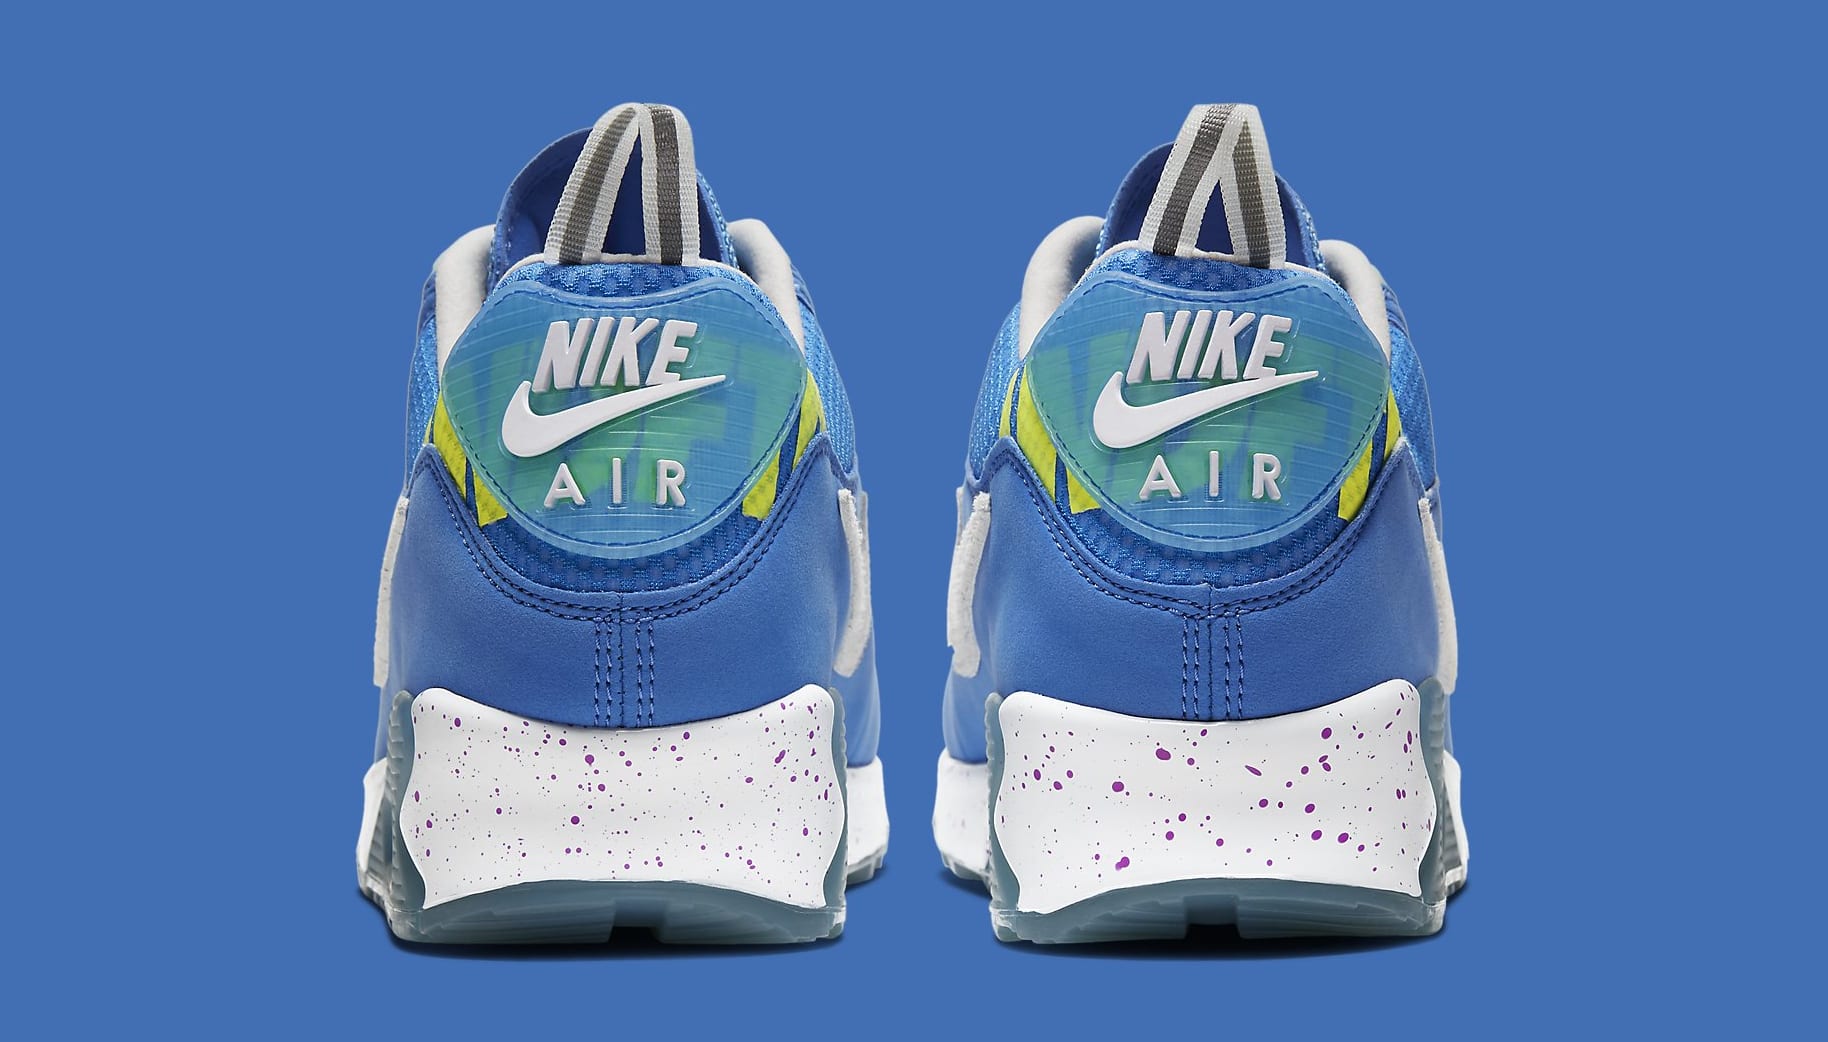 undefeated-nike-air-max-90-pacific-blue-cq2289-400-heel